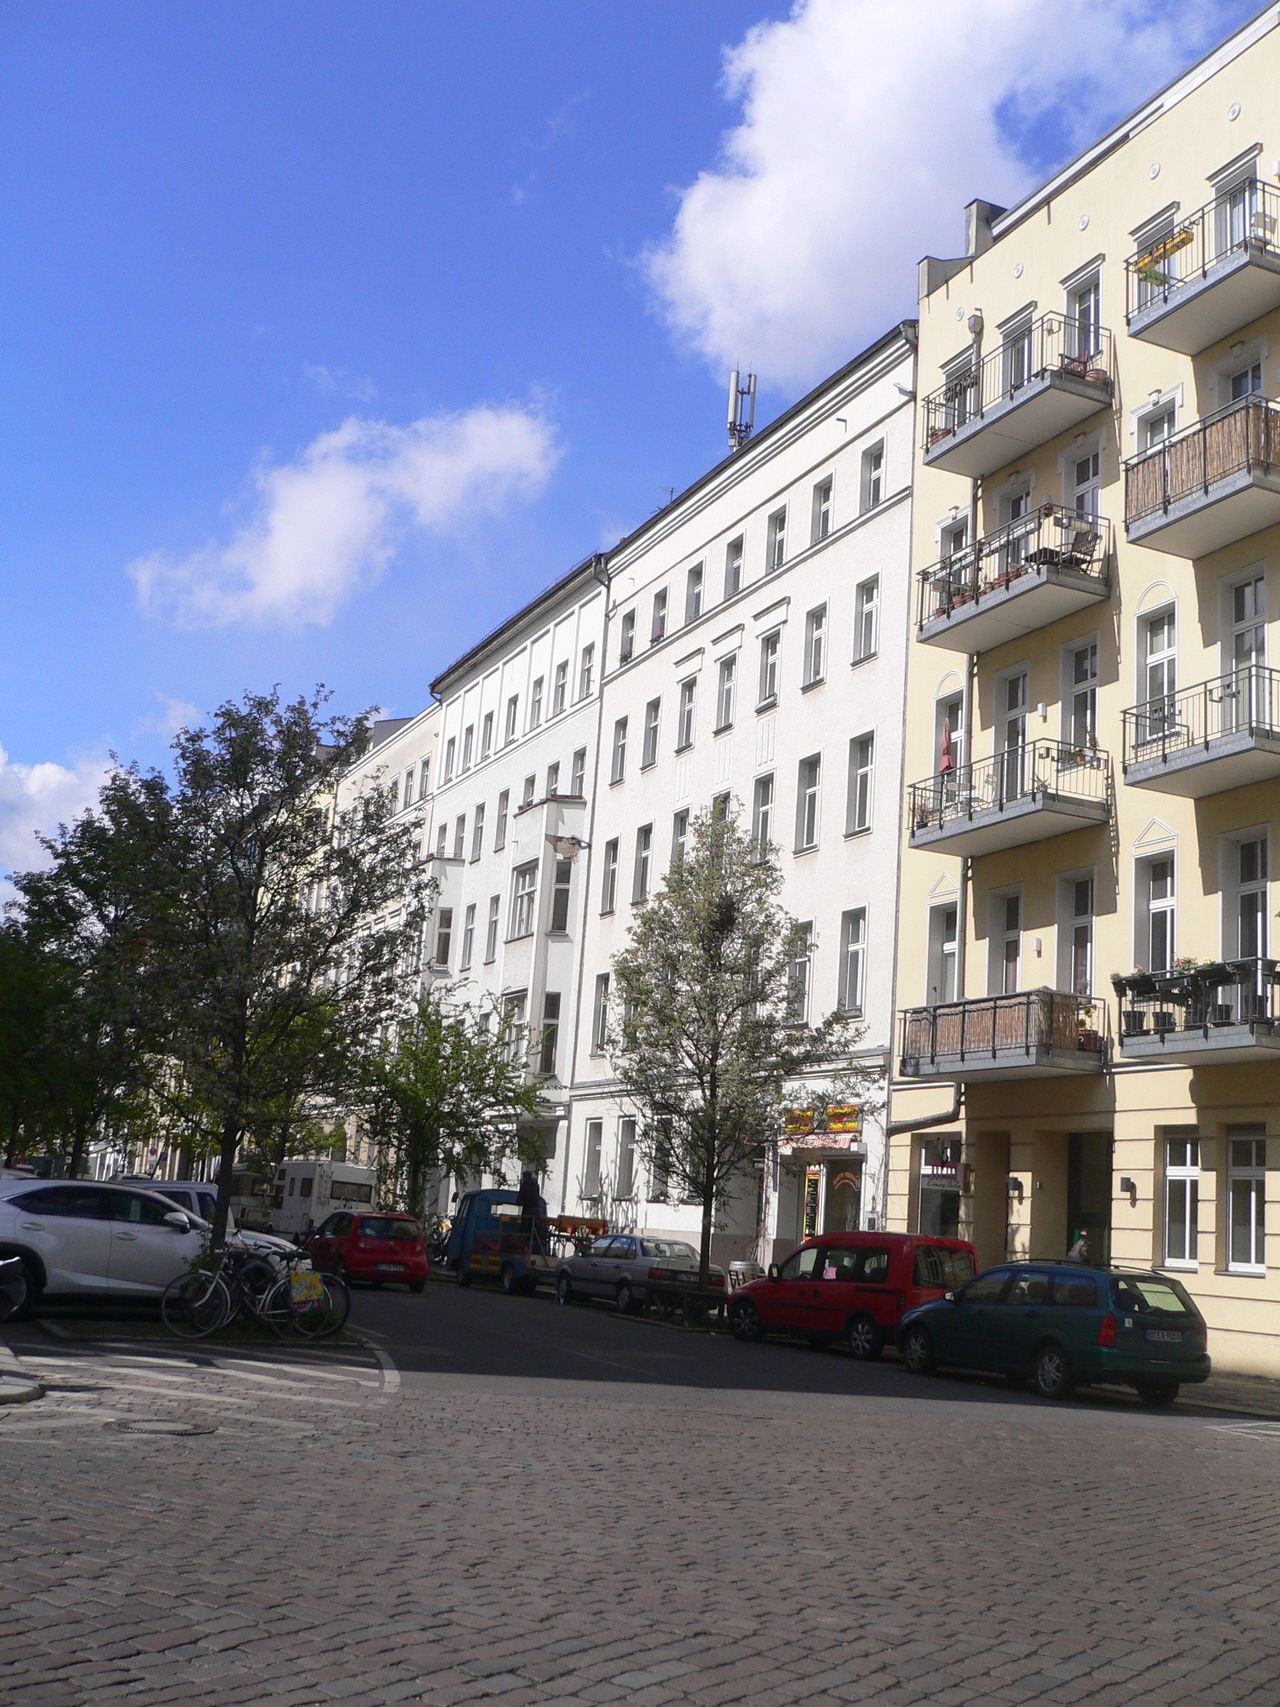 Stylish and cozy apartment in Mitte, near Friedrichstrasse